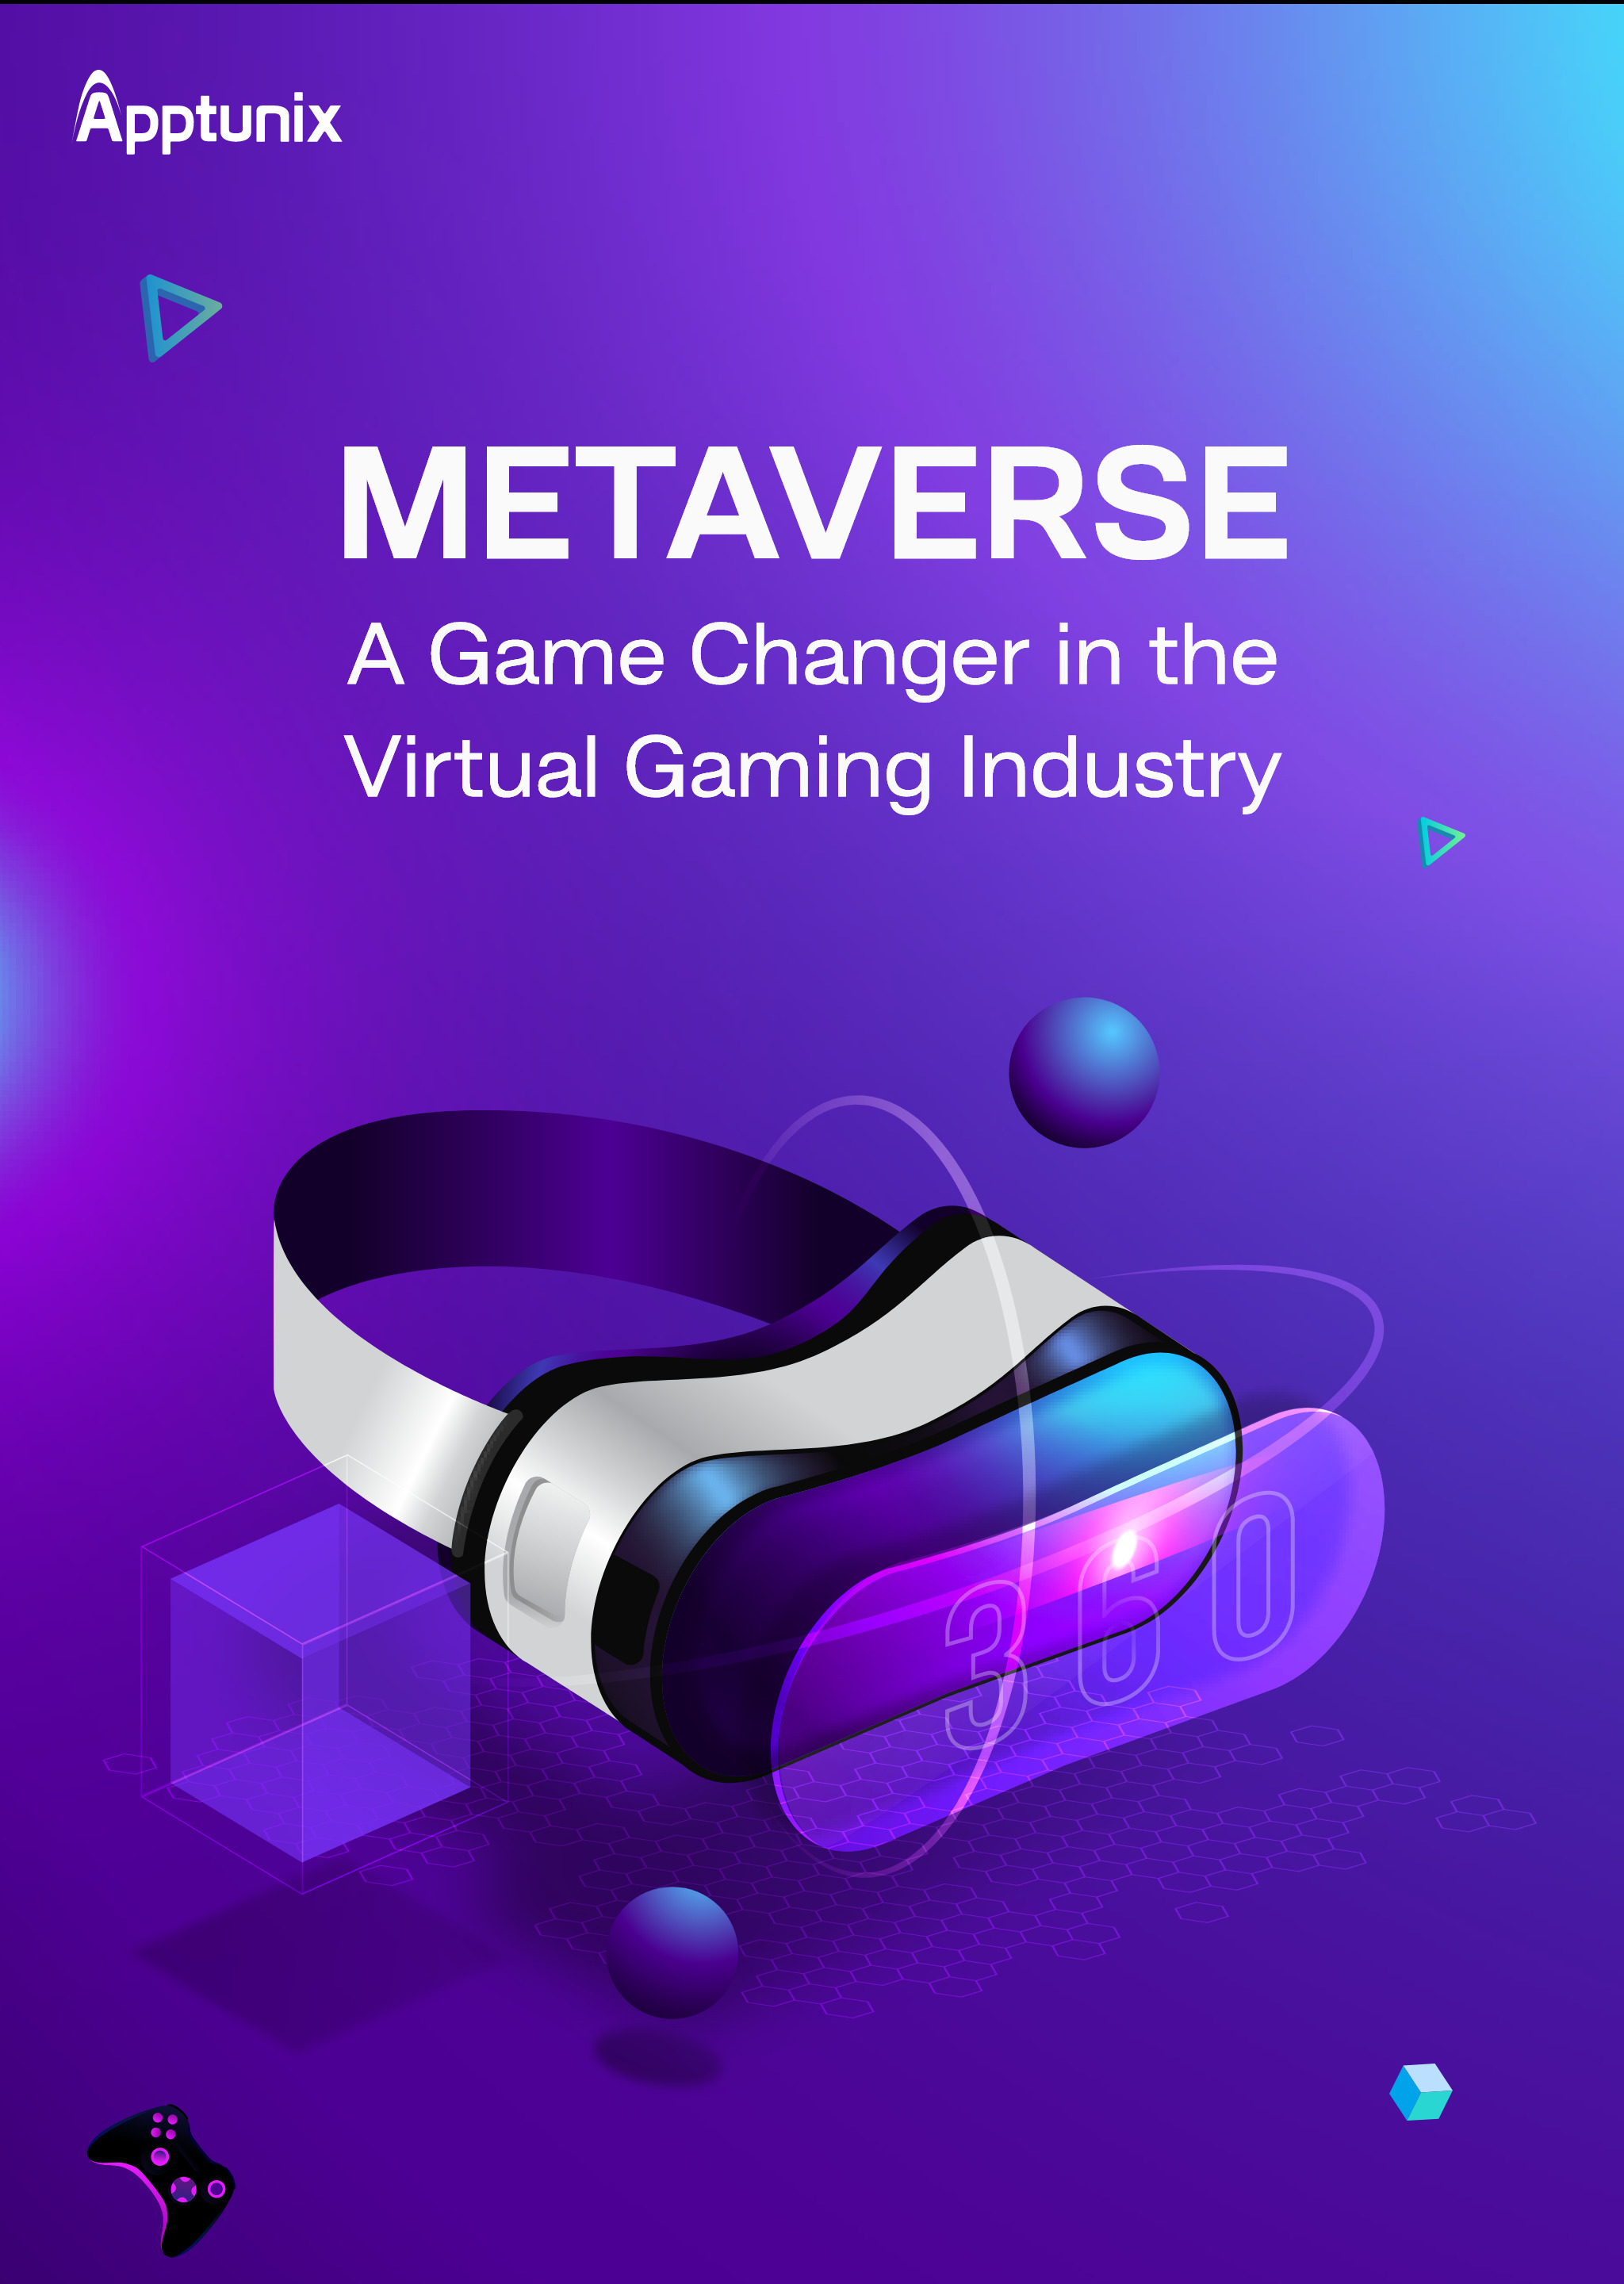 Metaverse - A Game Changer in the Virtual Gaming Industry